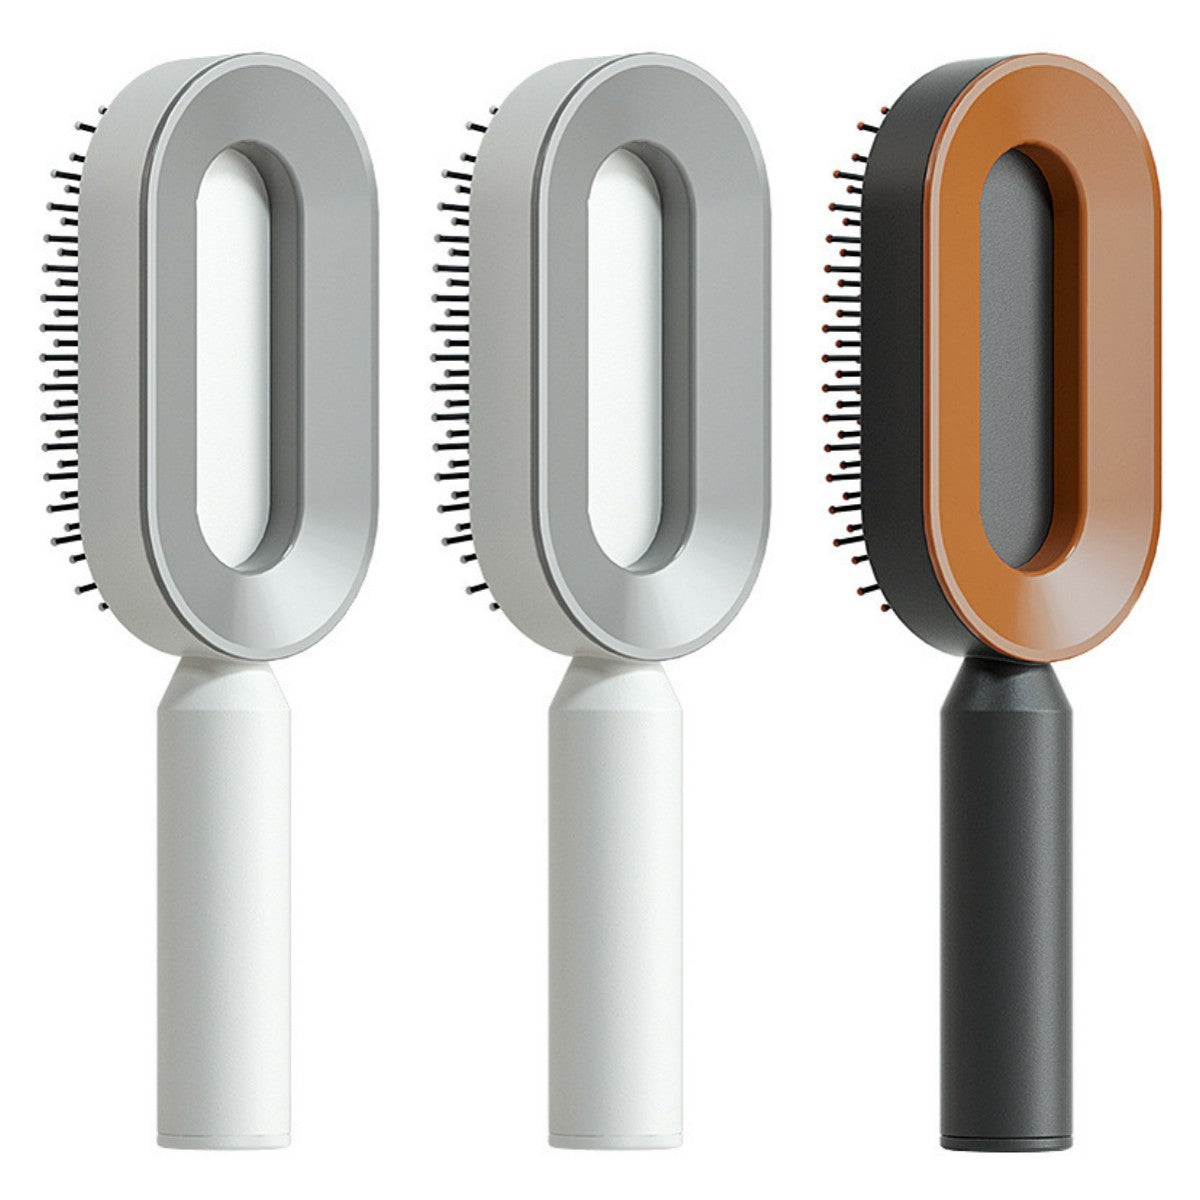 Self Cleaning Hair Brush* For Women One-key Cleaning Hair Loss Airbag Massage Scalp Comb Anti-Static Hairbrush